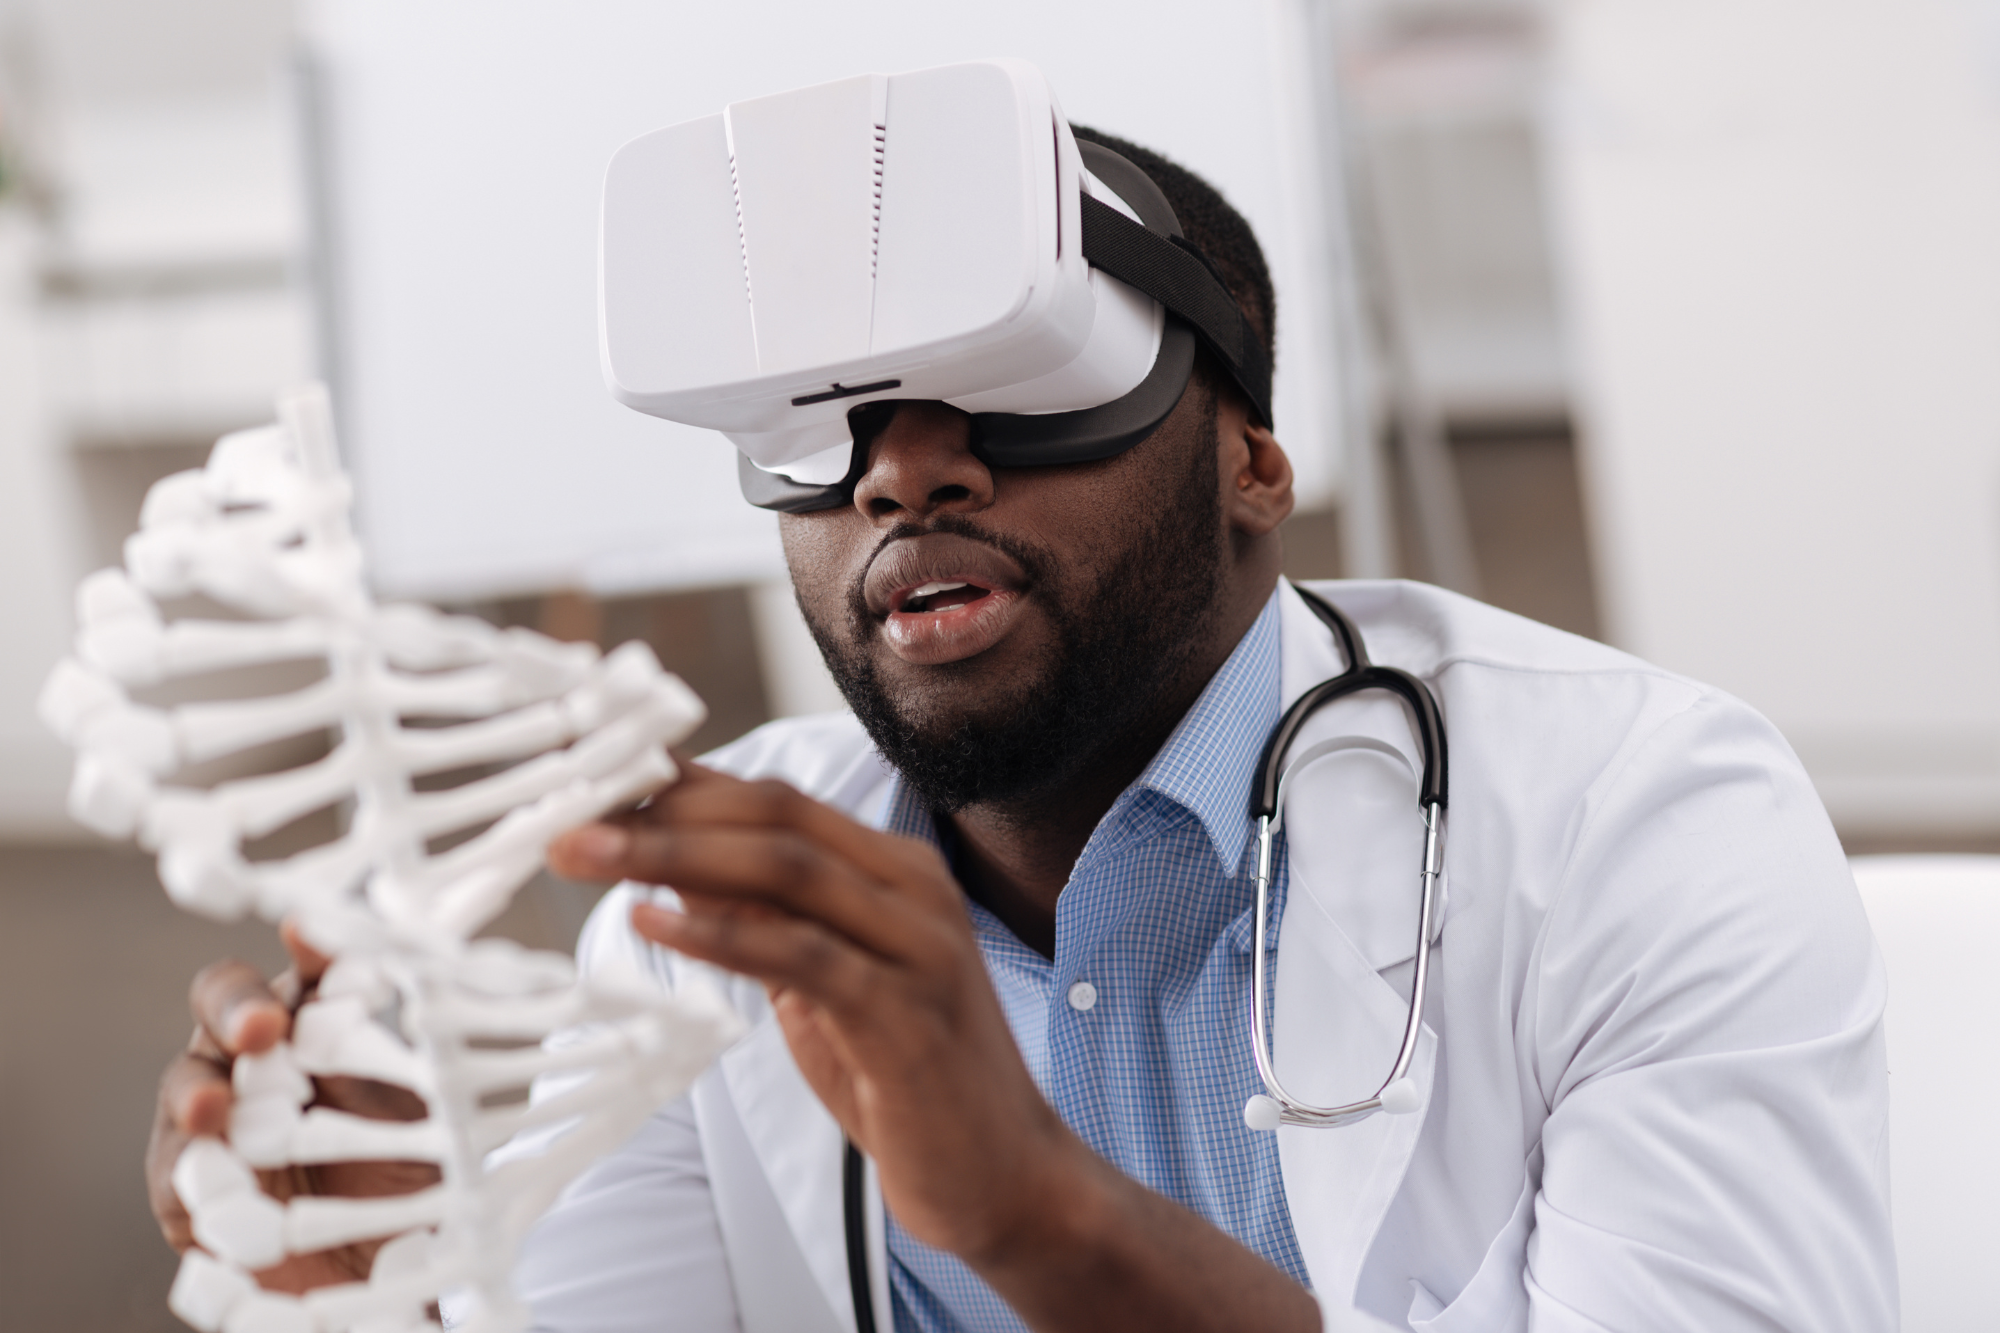 A doctor implements innovation in his medical practice by using AR technology to analyze a model double helix.